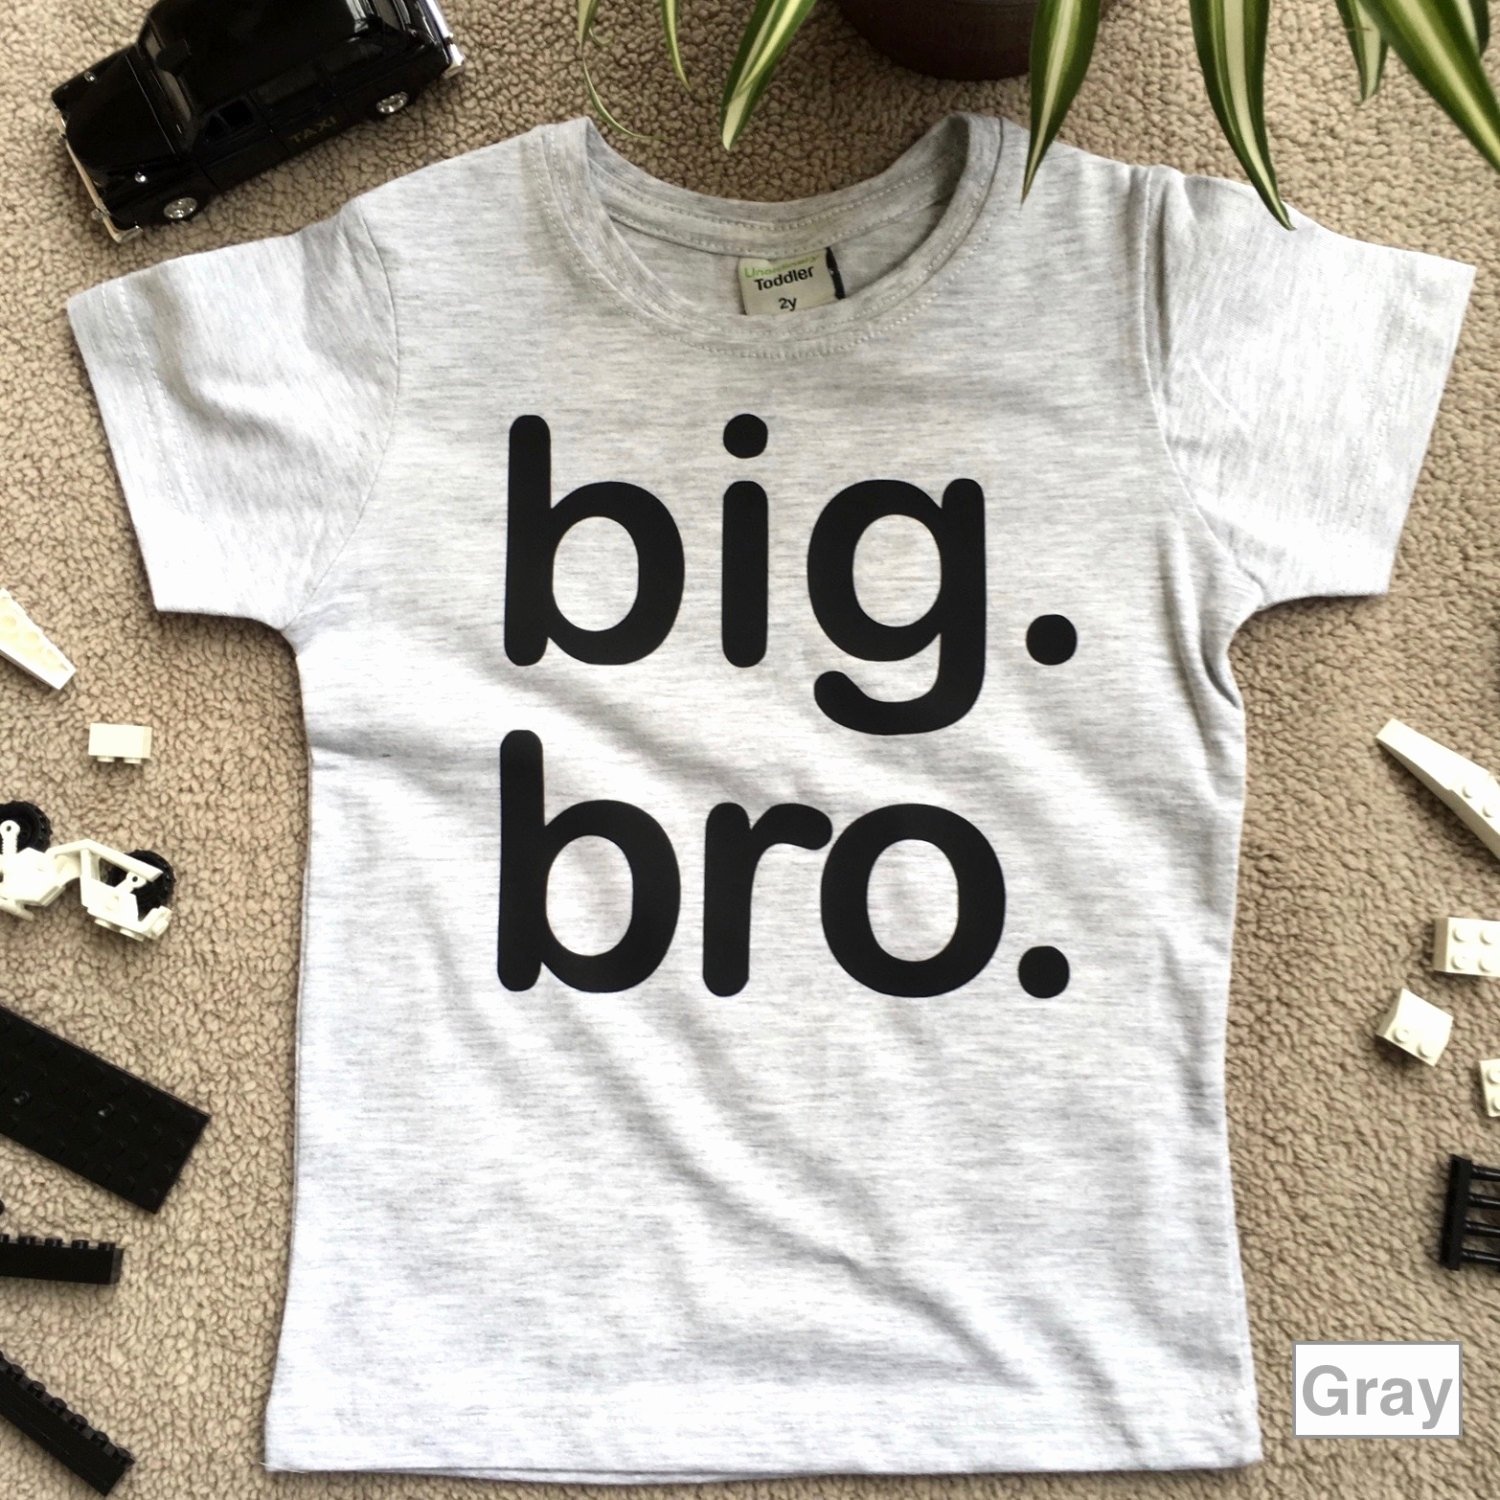 10 Unique Big Brother T Shirt Ideas 50 luxury wedding gift ideas for brother wedding inspirations 2022